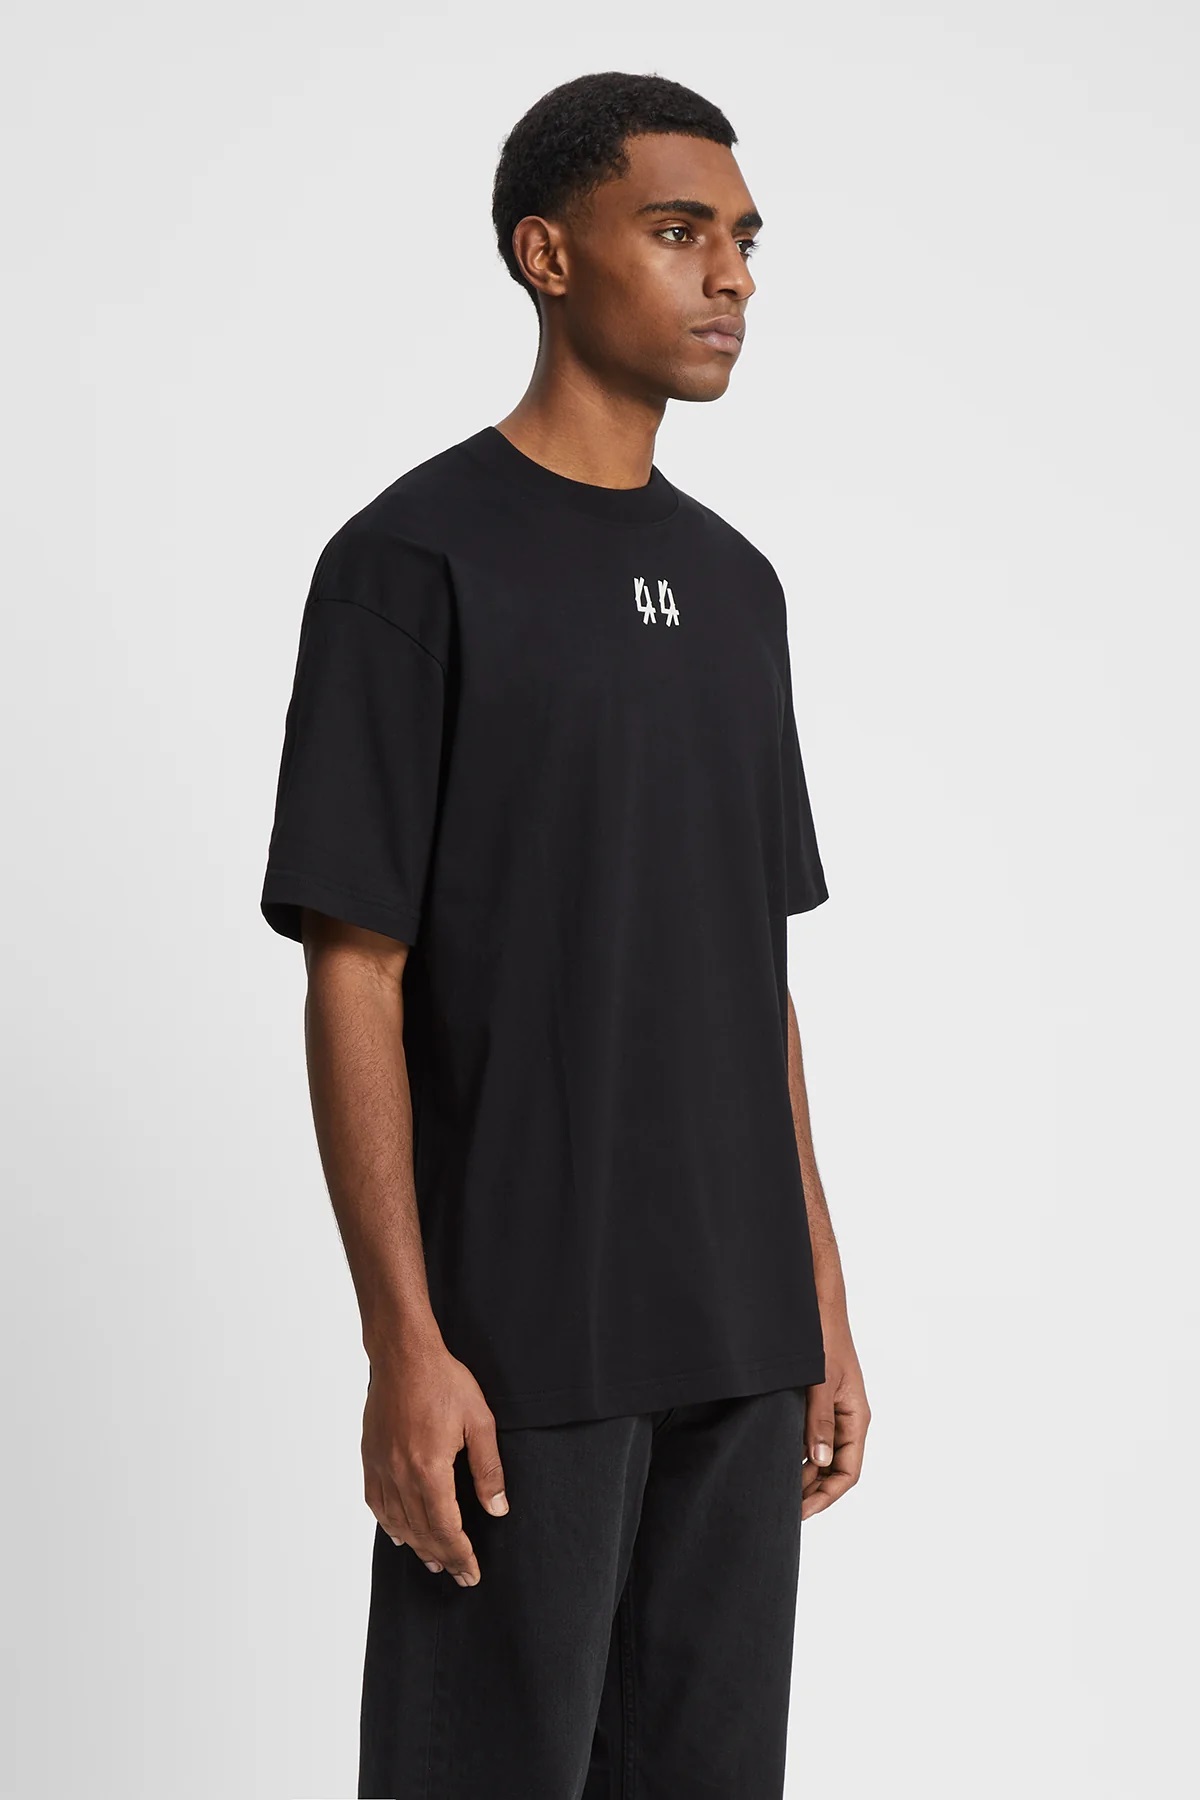 44 LABEL GROUP Continuum T-Shirt in Black XL